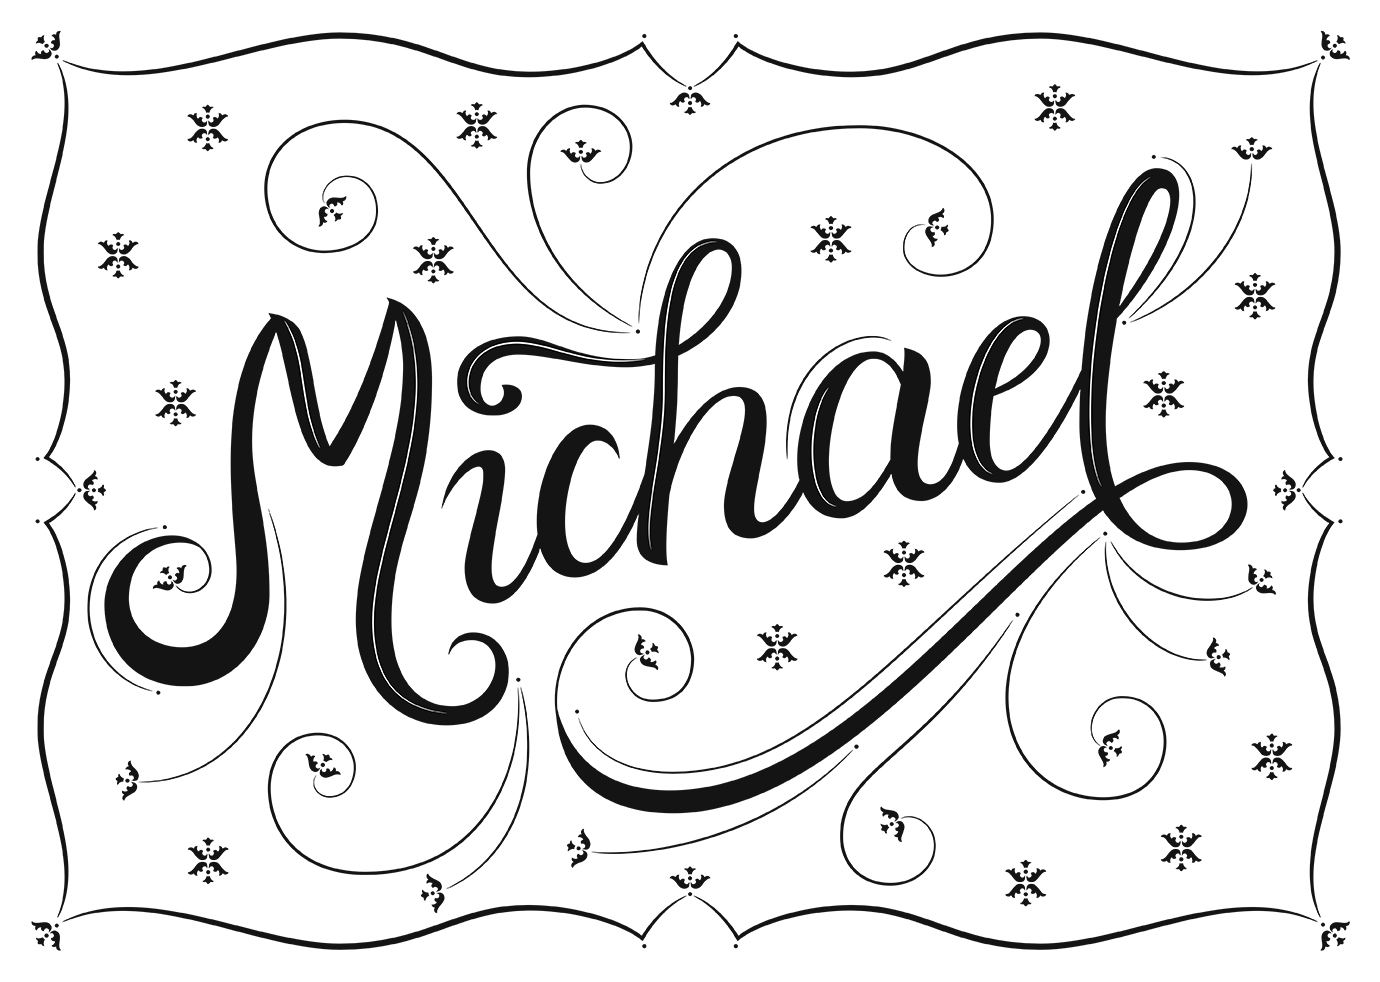 Lettering piece "Michael" black and white